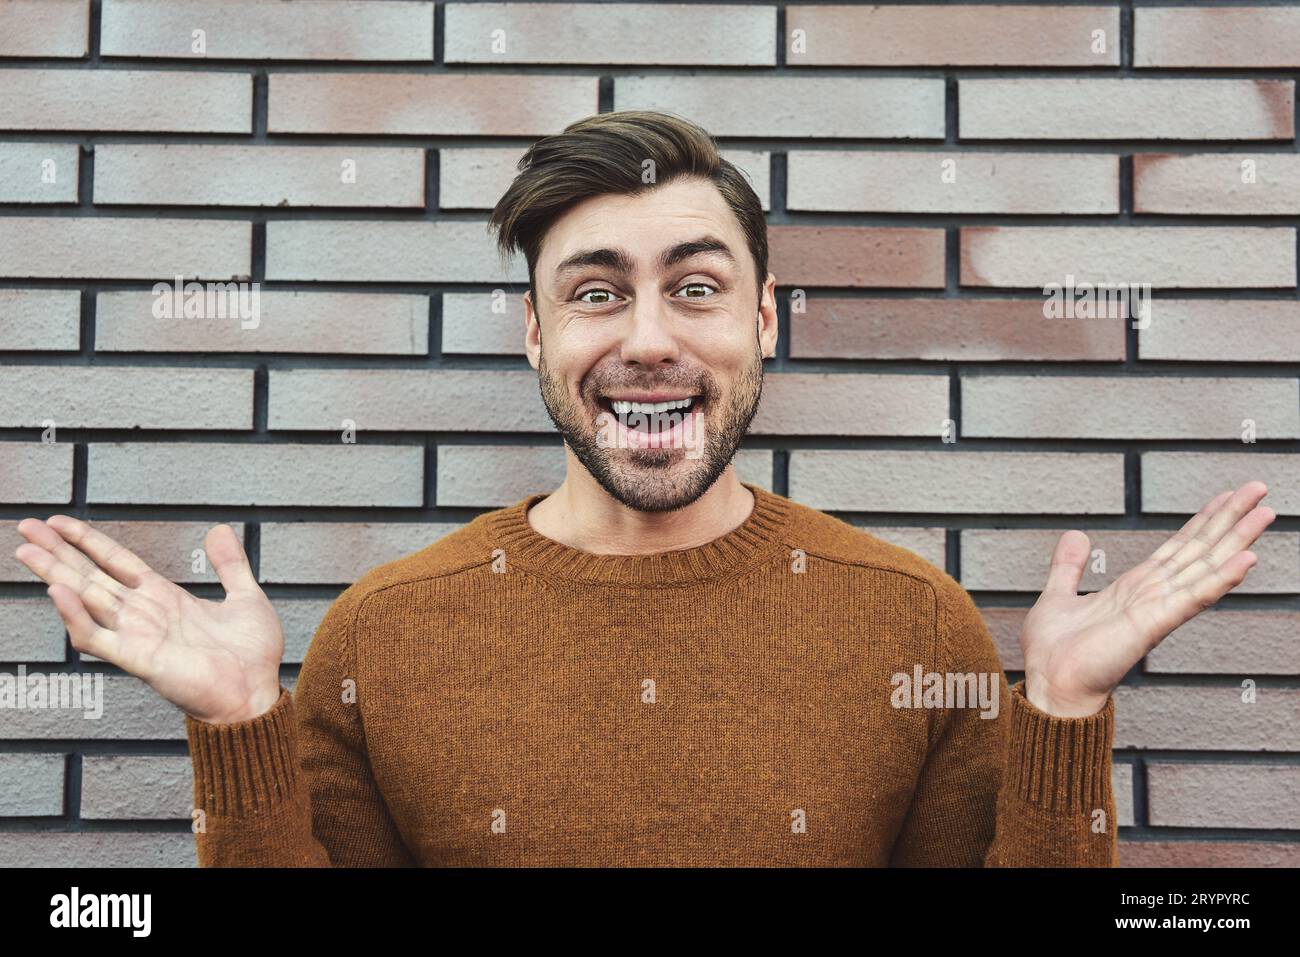 Close up Happy Handsome Man in Trendy Fashion Leaning on Old Brick Wall While Looking at the Camera. Stock Photo